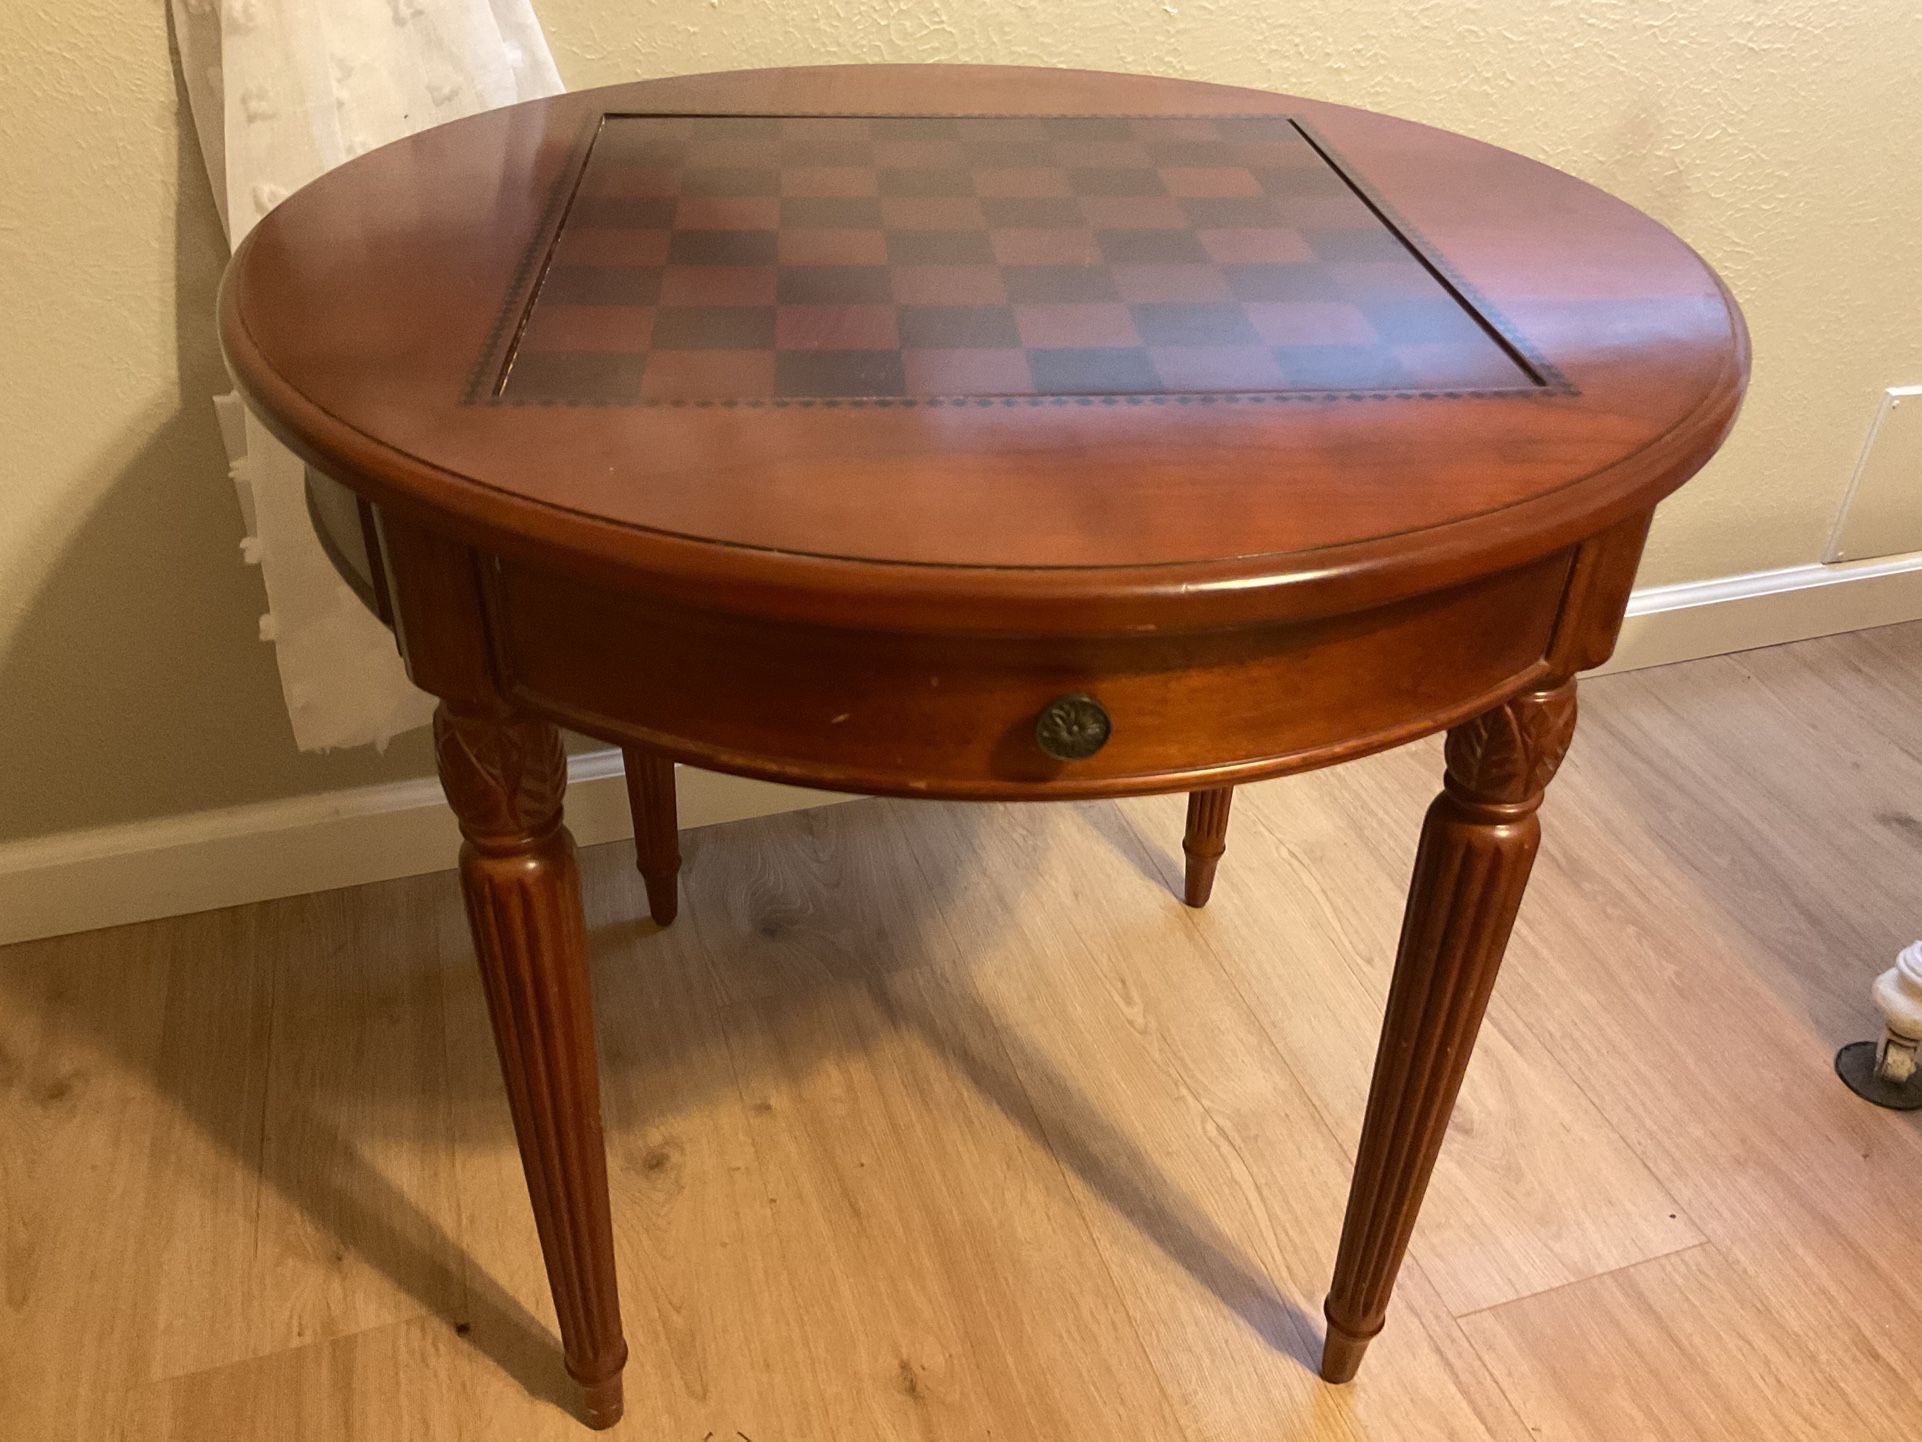 Bombay Company Game Table